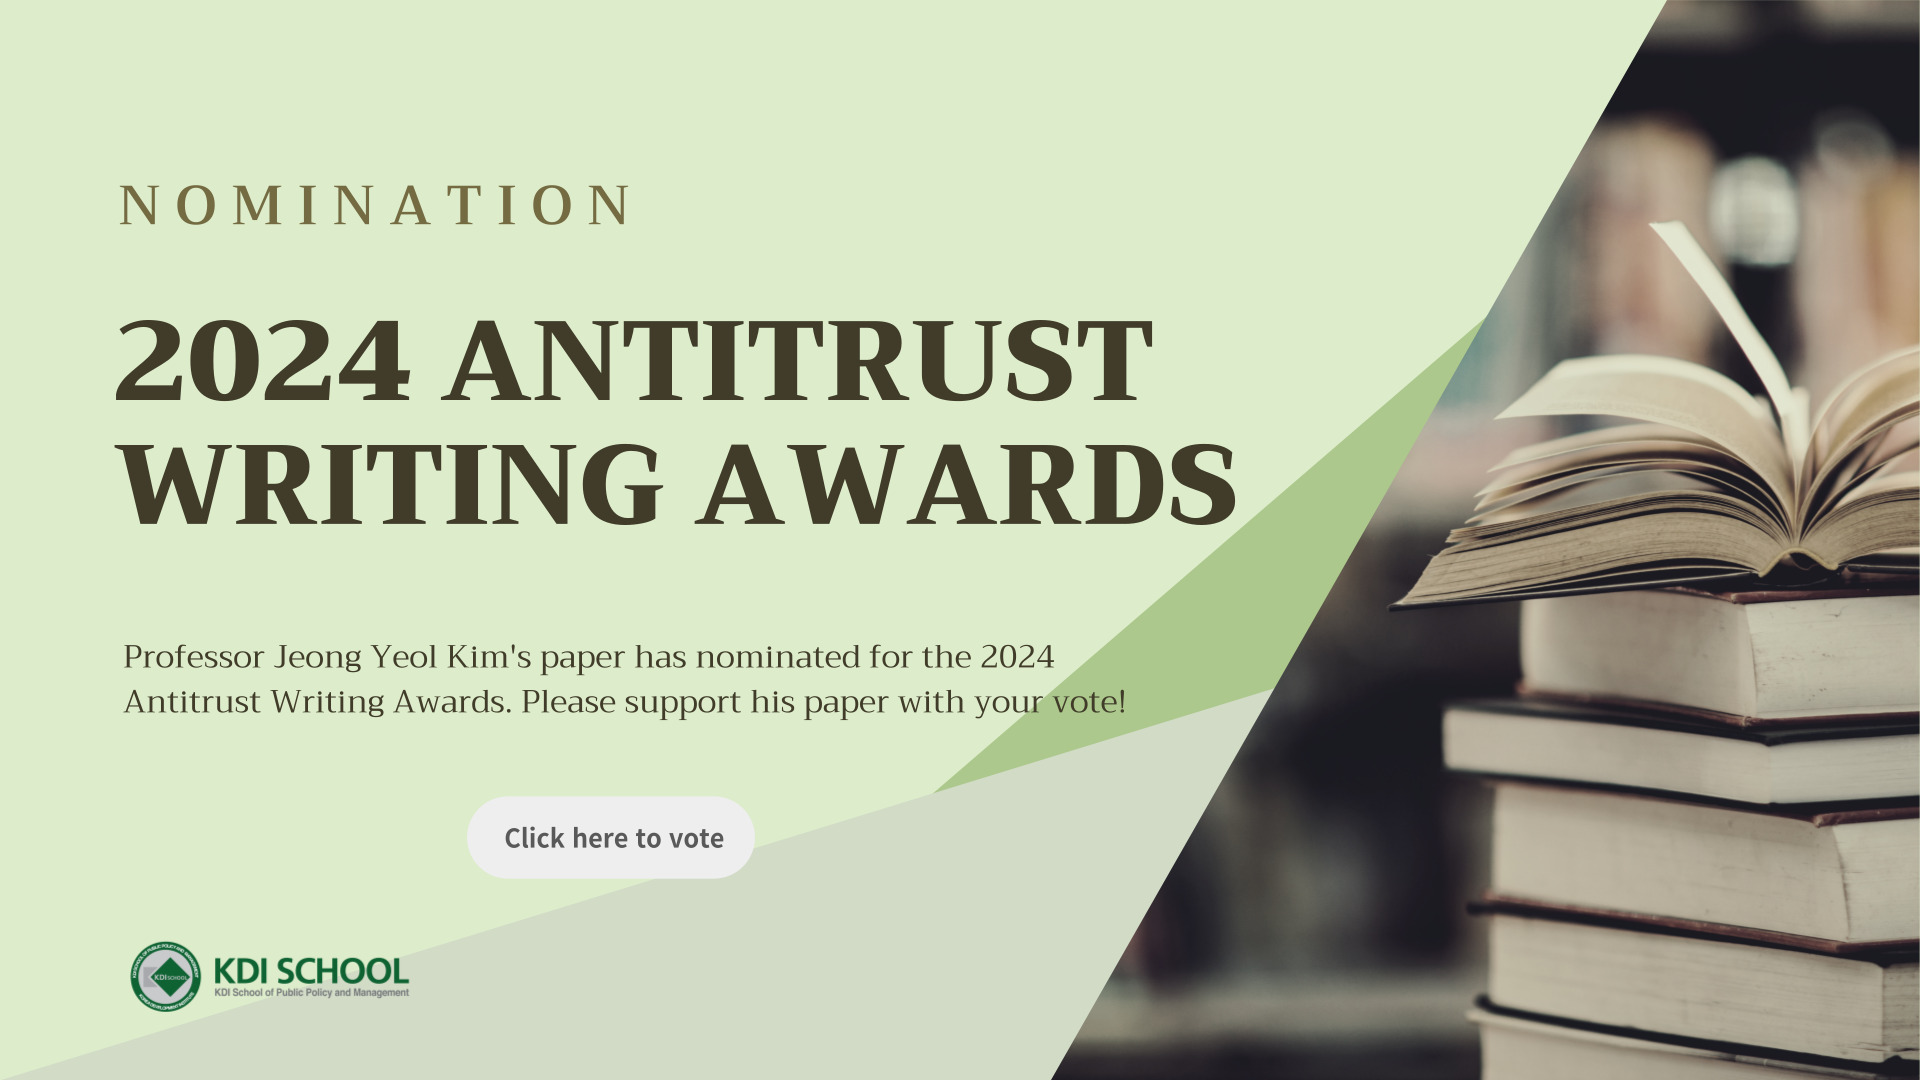 Prof. Jeong Yeol Kim's paper about leniency policy was nominated for 2024 Antitrust Writing Awards.